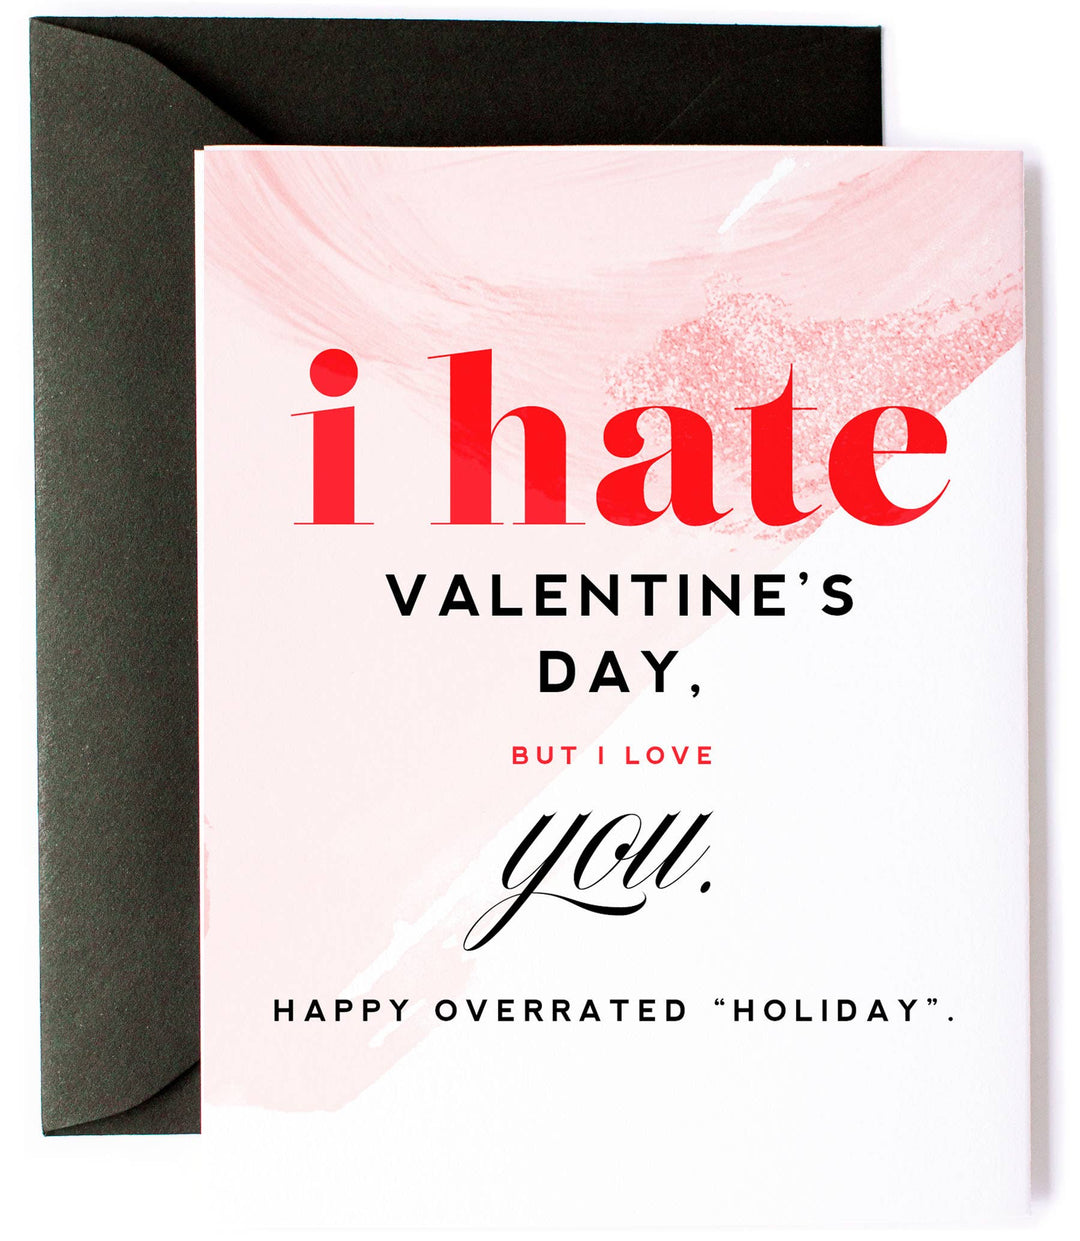 Hate Valentines Day butLove You- Funny Valentine's Day Card